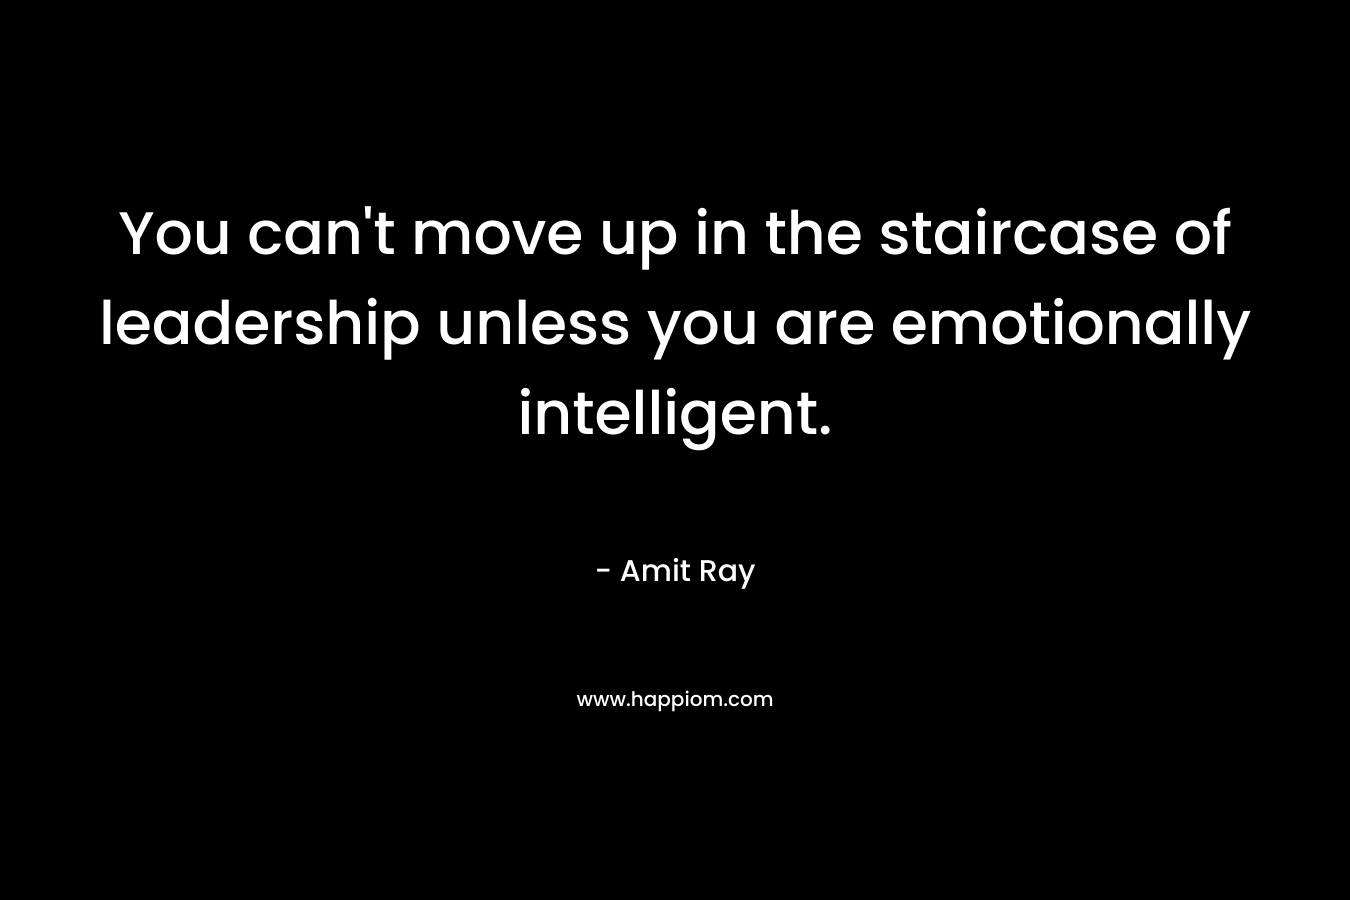 You can’t move up in the staircase of leadership unless you are emotionally intelligent. – Amit Ray